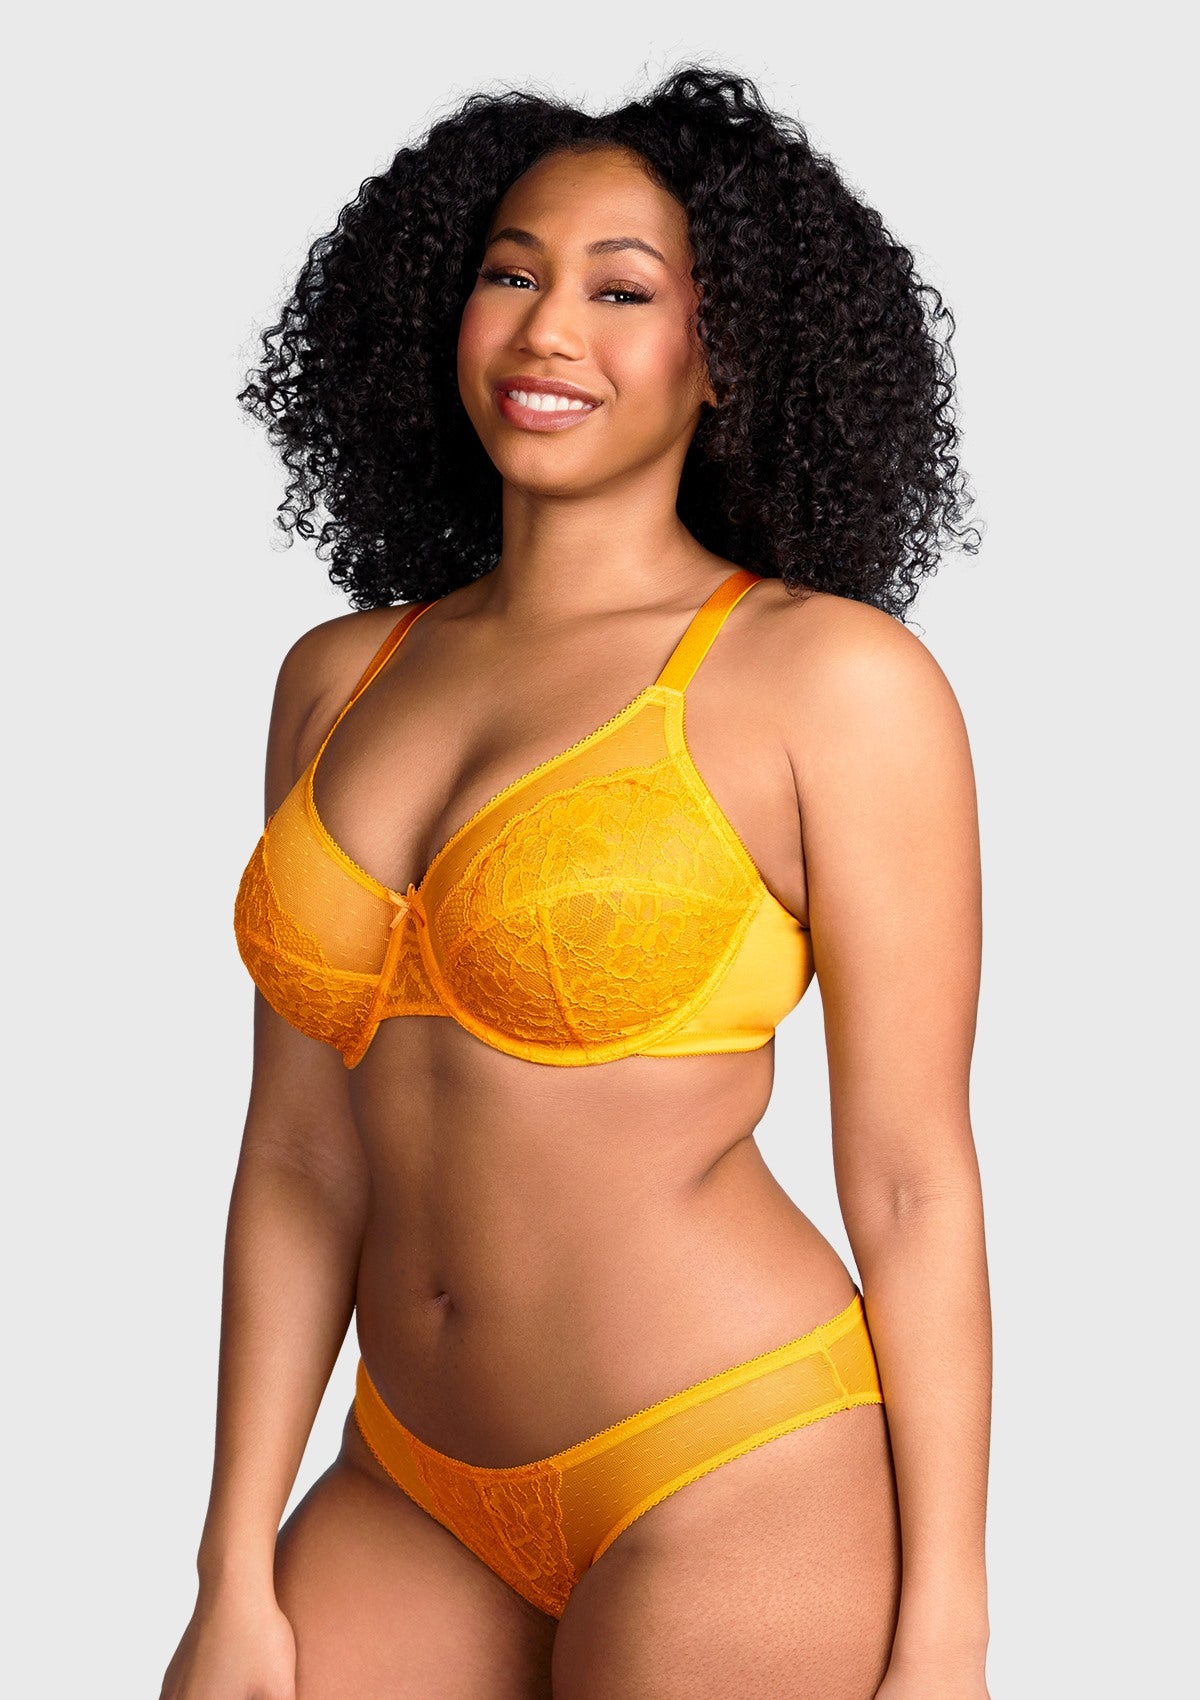 Enchante - Yellow Unlined Underwire Lace Minimizer Bra , HSIA - Cadmium Yellow / 42 / H